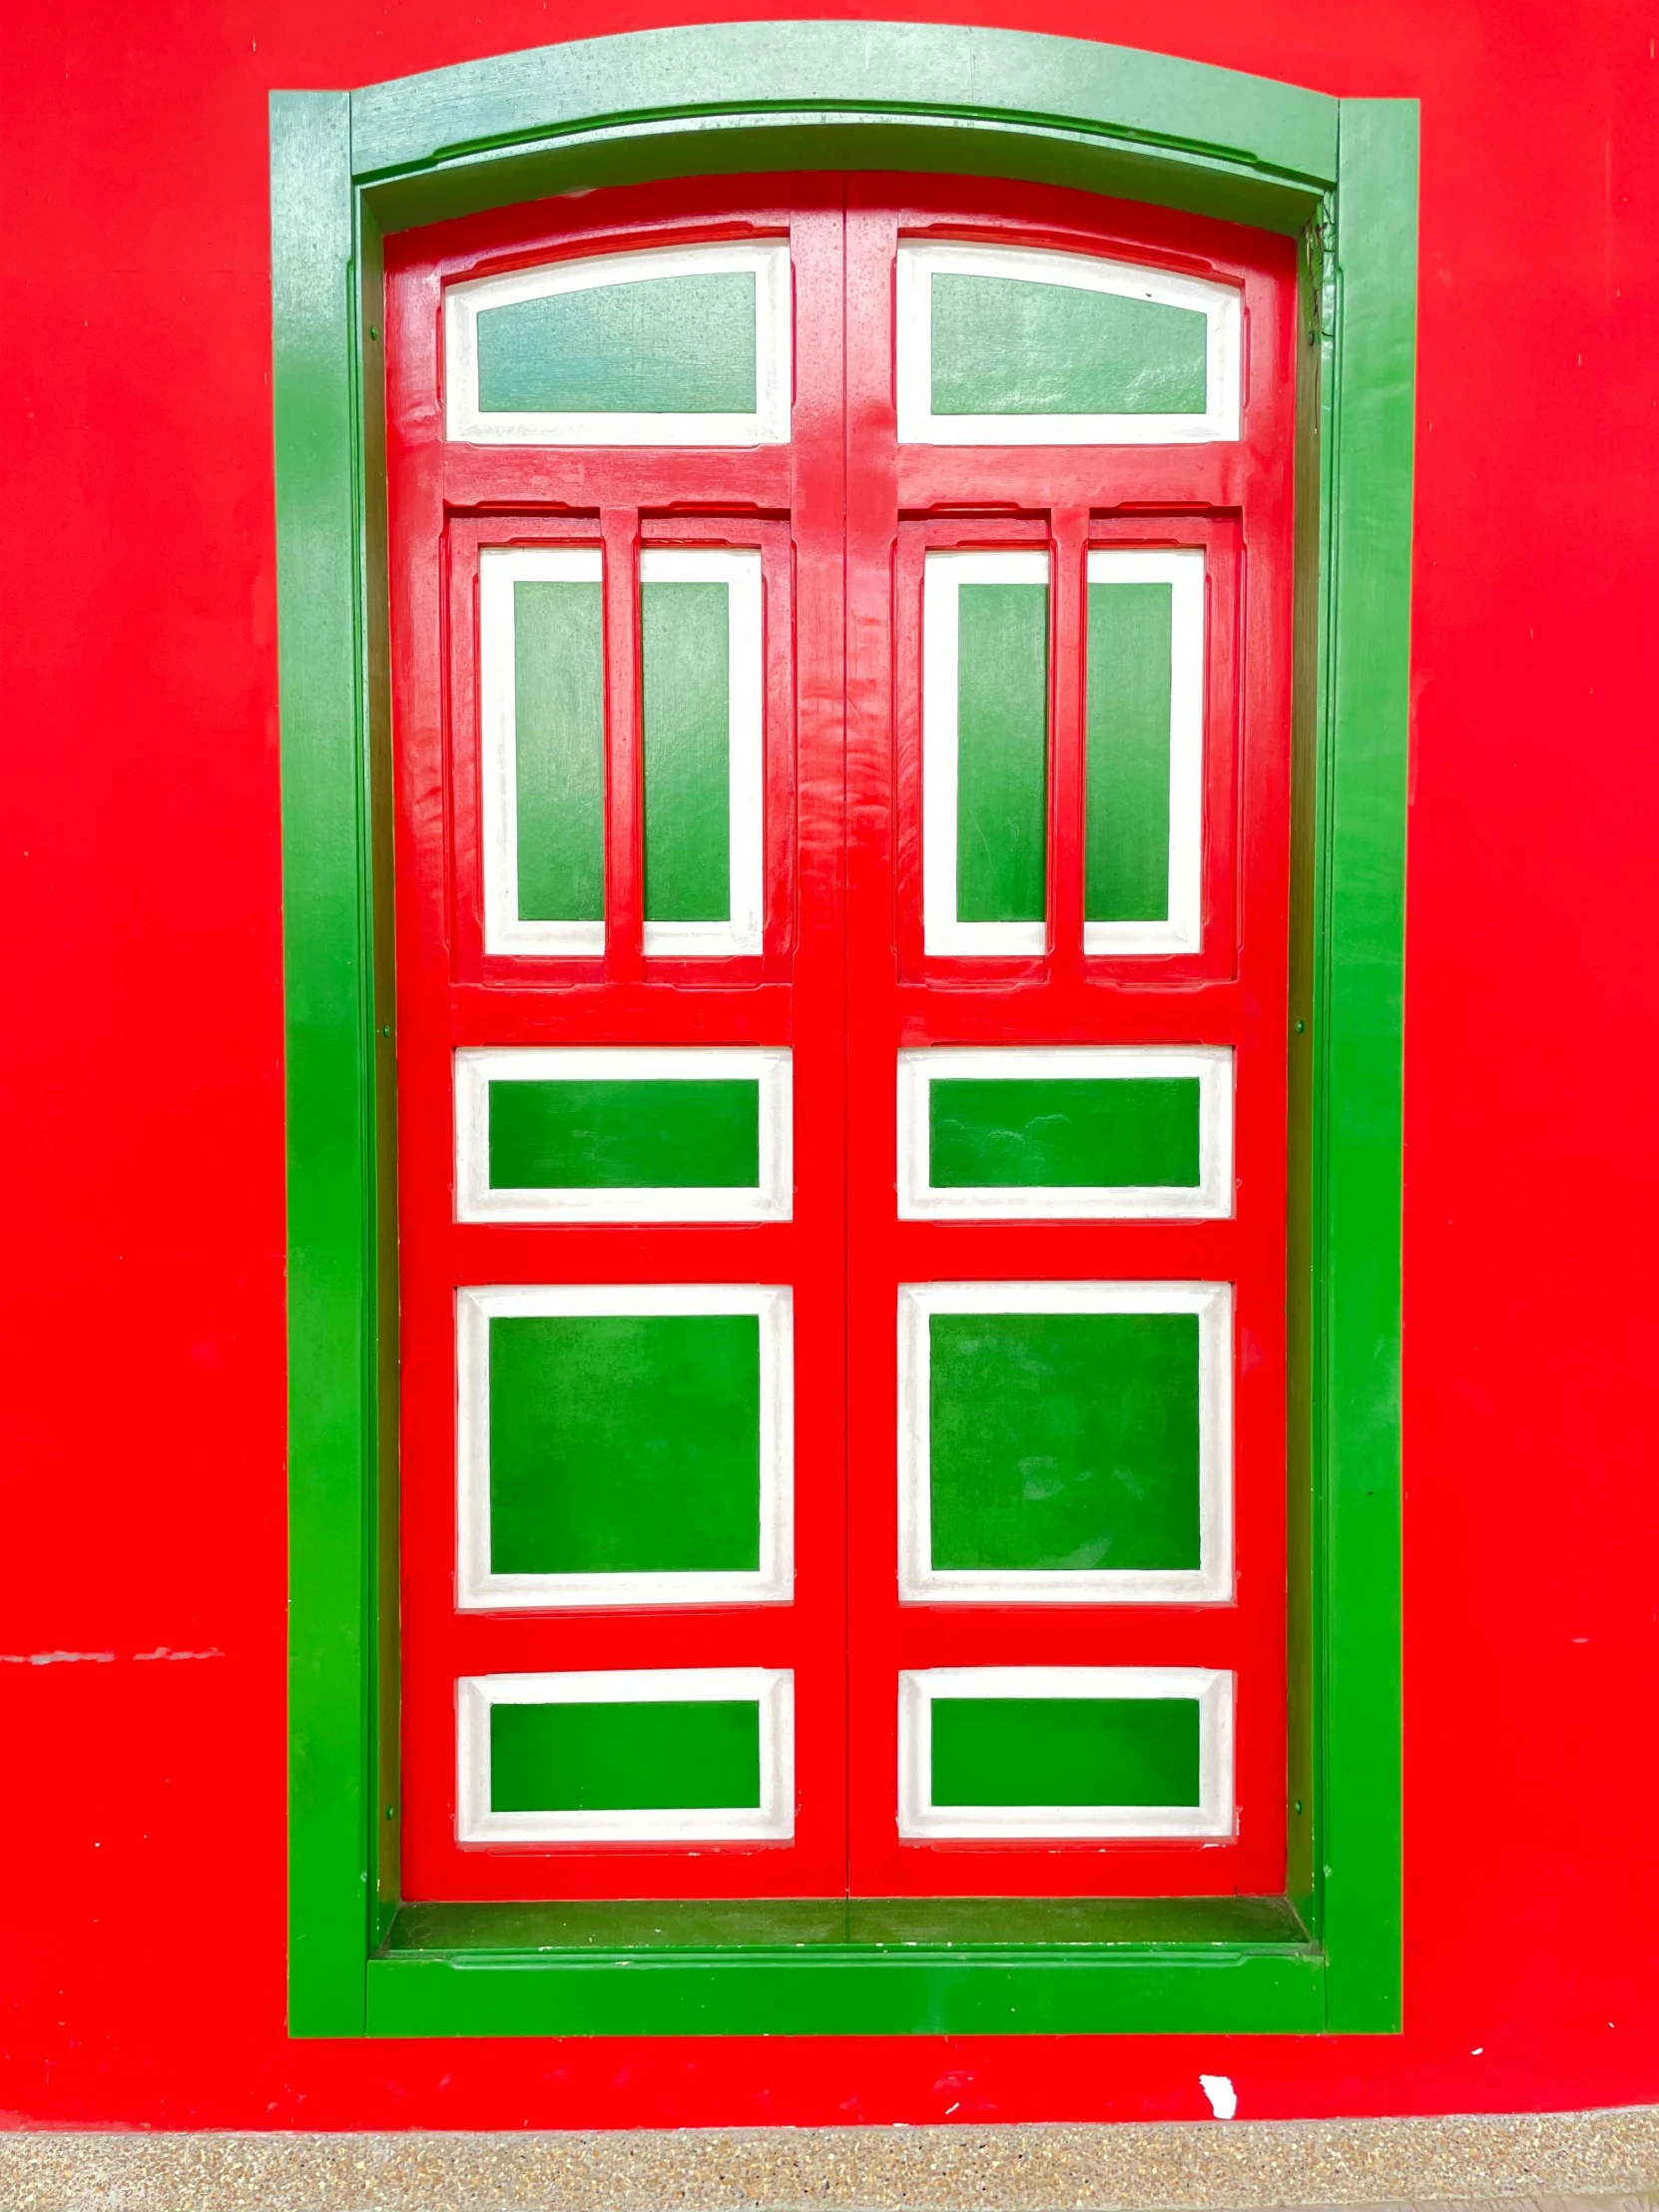 a red door with windows is shown on a red wall